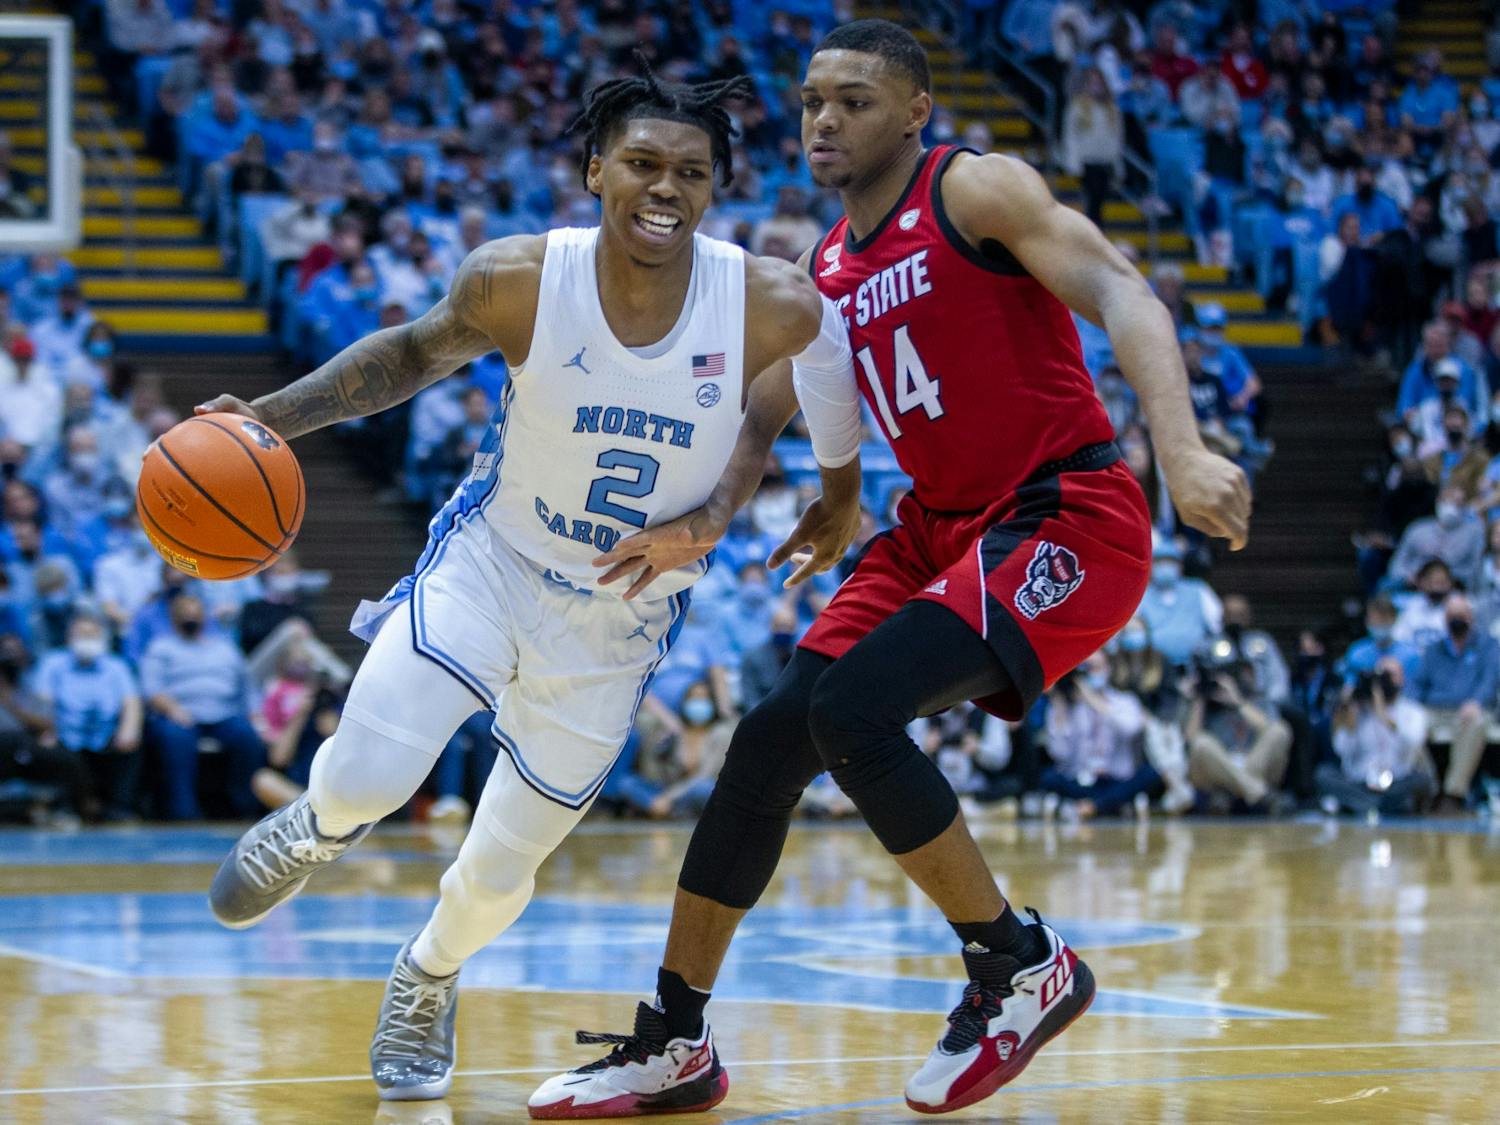 Sophomore guard Caleb Love (2) runs with the ball at the game against NC State at the Smith Center in Chapel Hill on Jan. 29, 2022. UNC won 100-80.